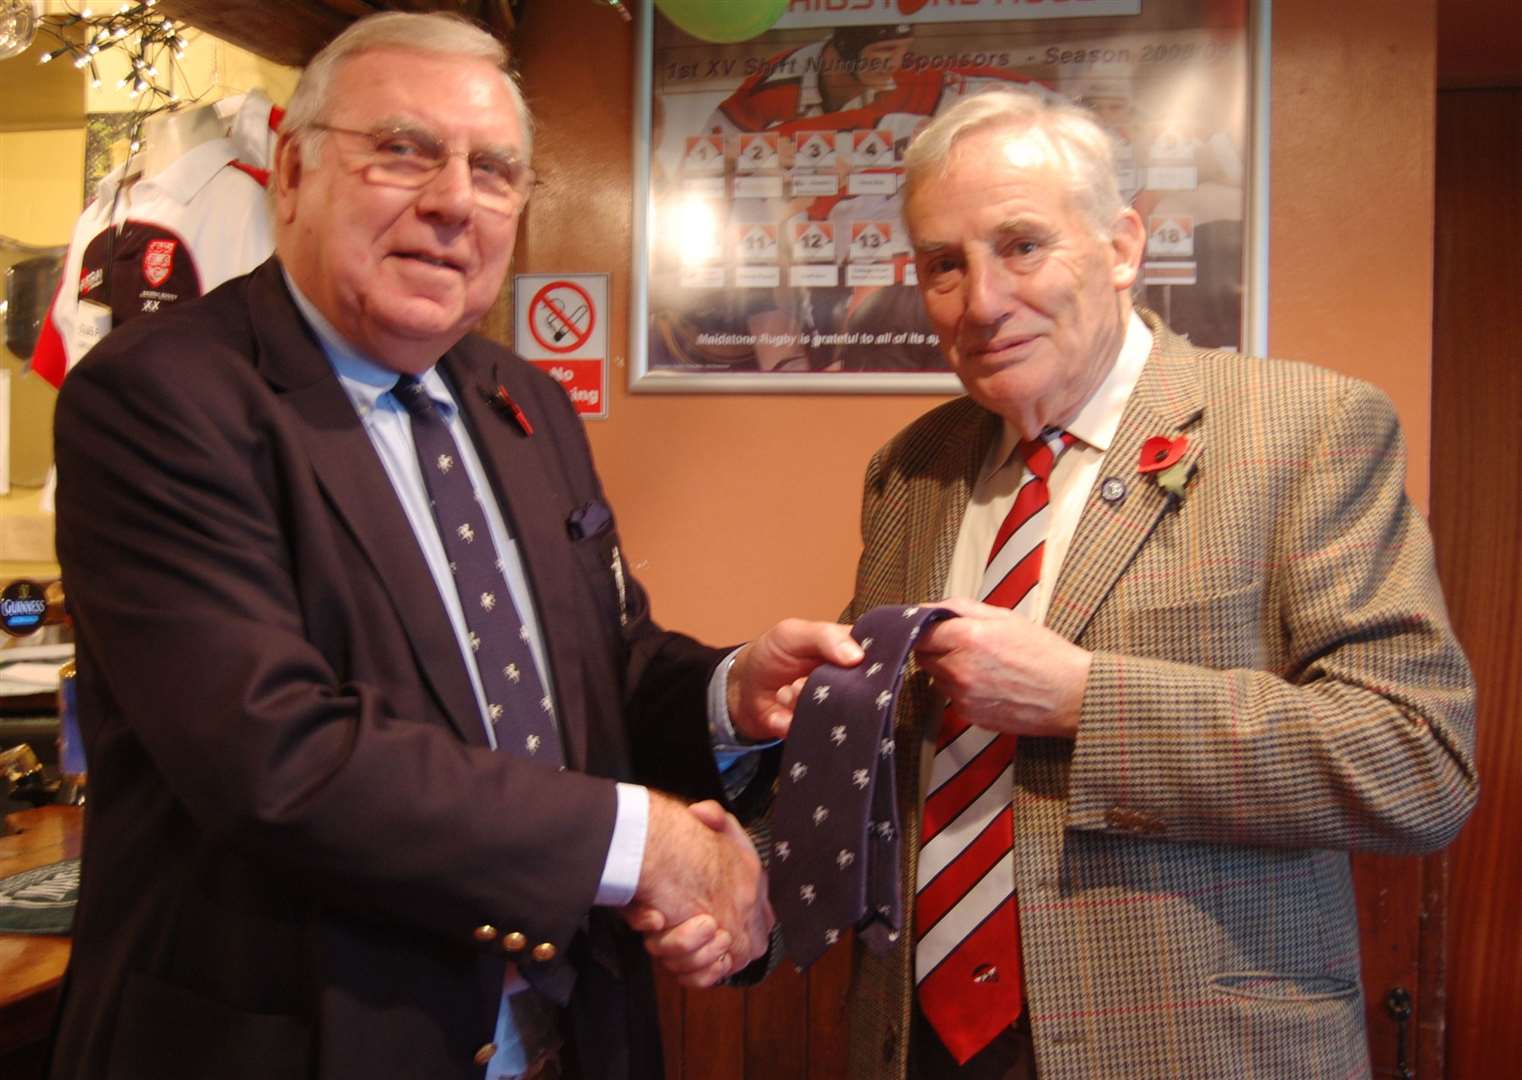 Robin Taylor, then president of the Rugby Football Union present a vice presidency tie to Ray Vale in 2008